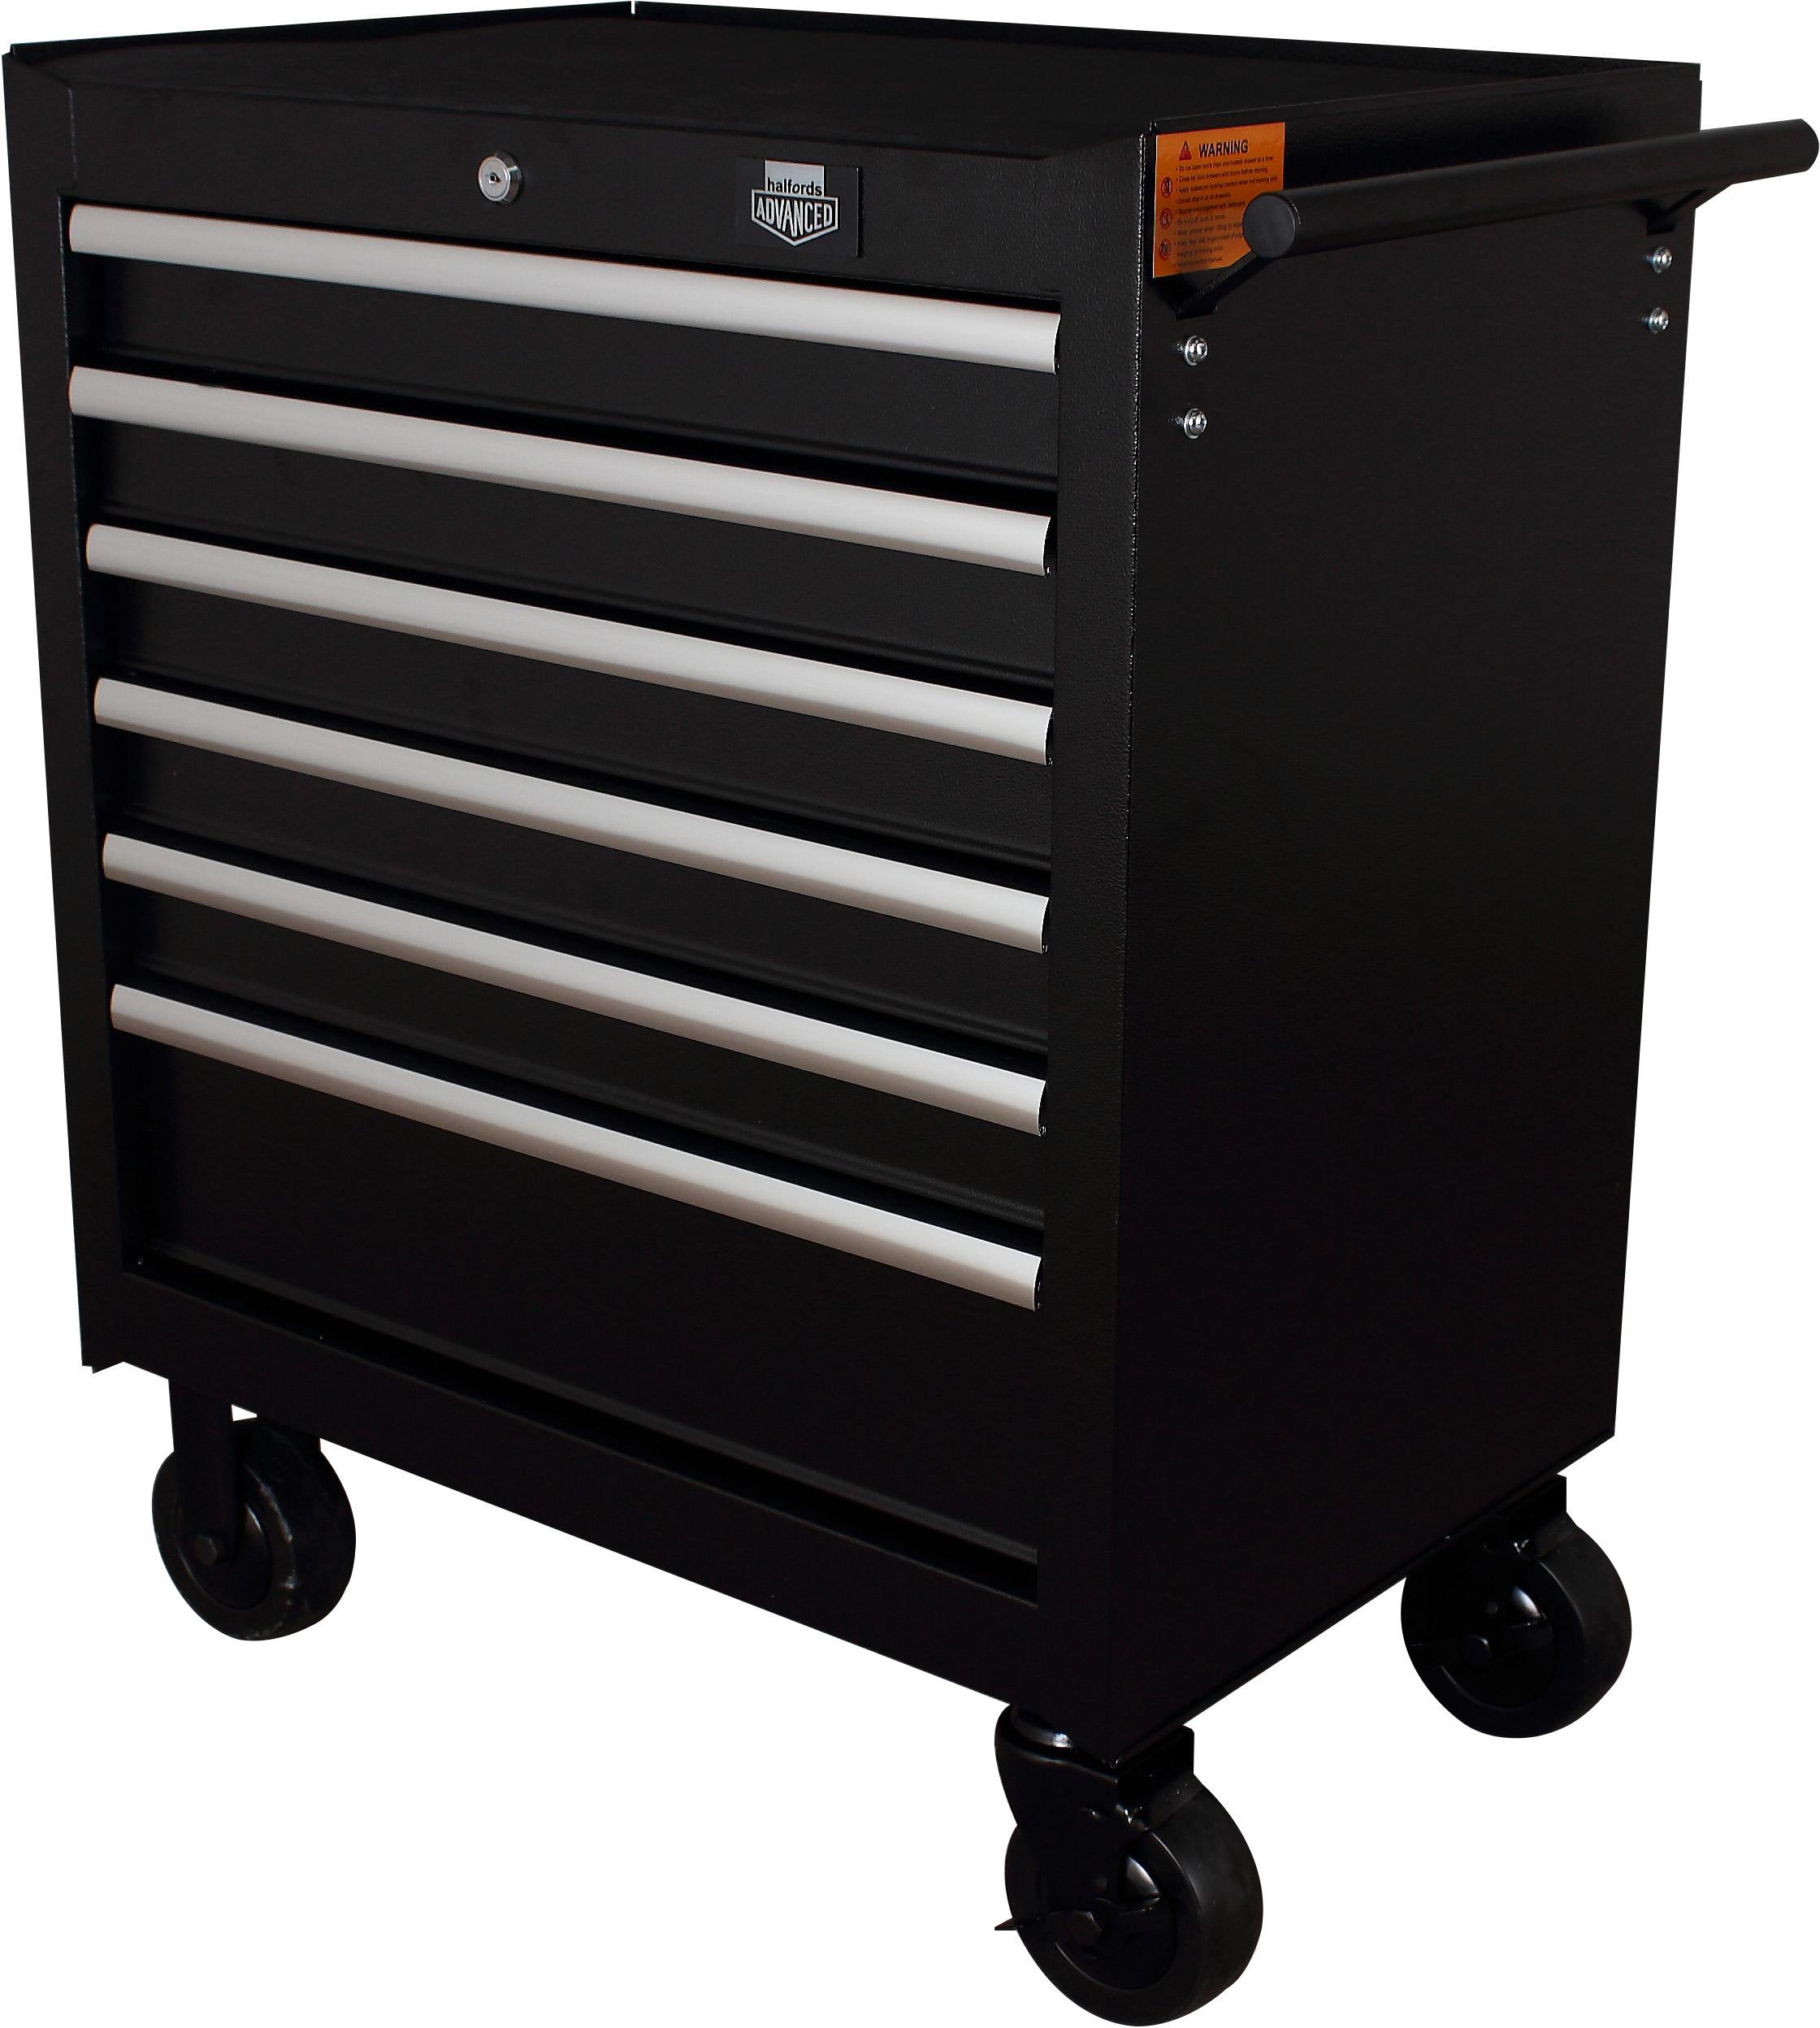 Halfords Advanced 6 Drawer Tool Black for only £300.00